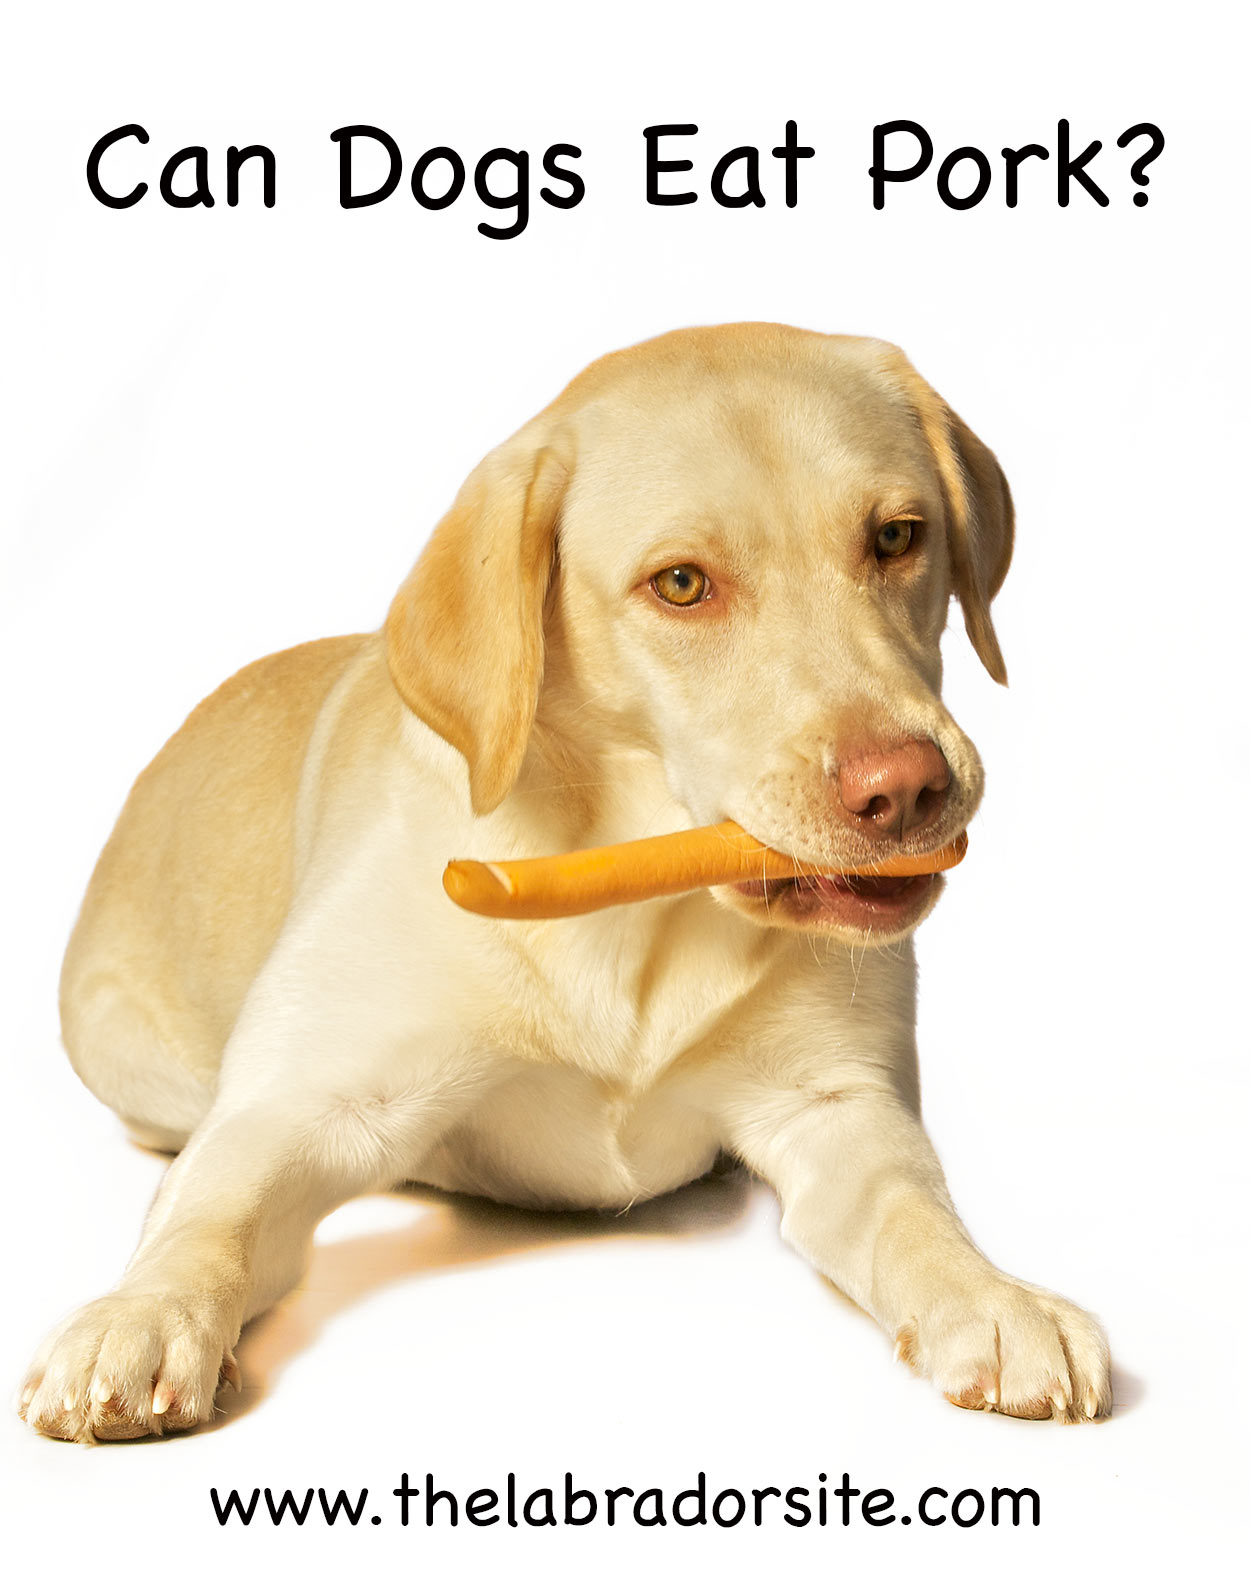 can dogs eat pork?